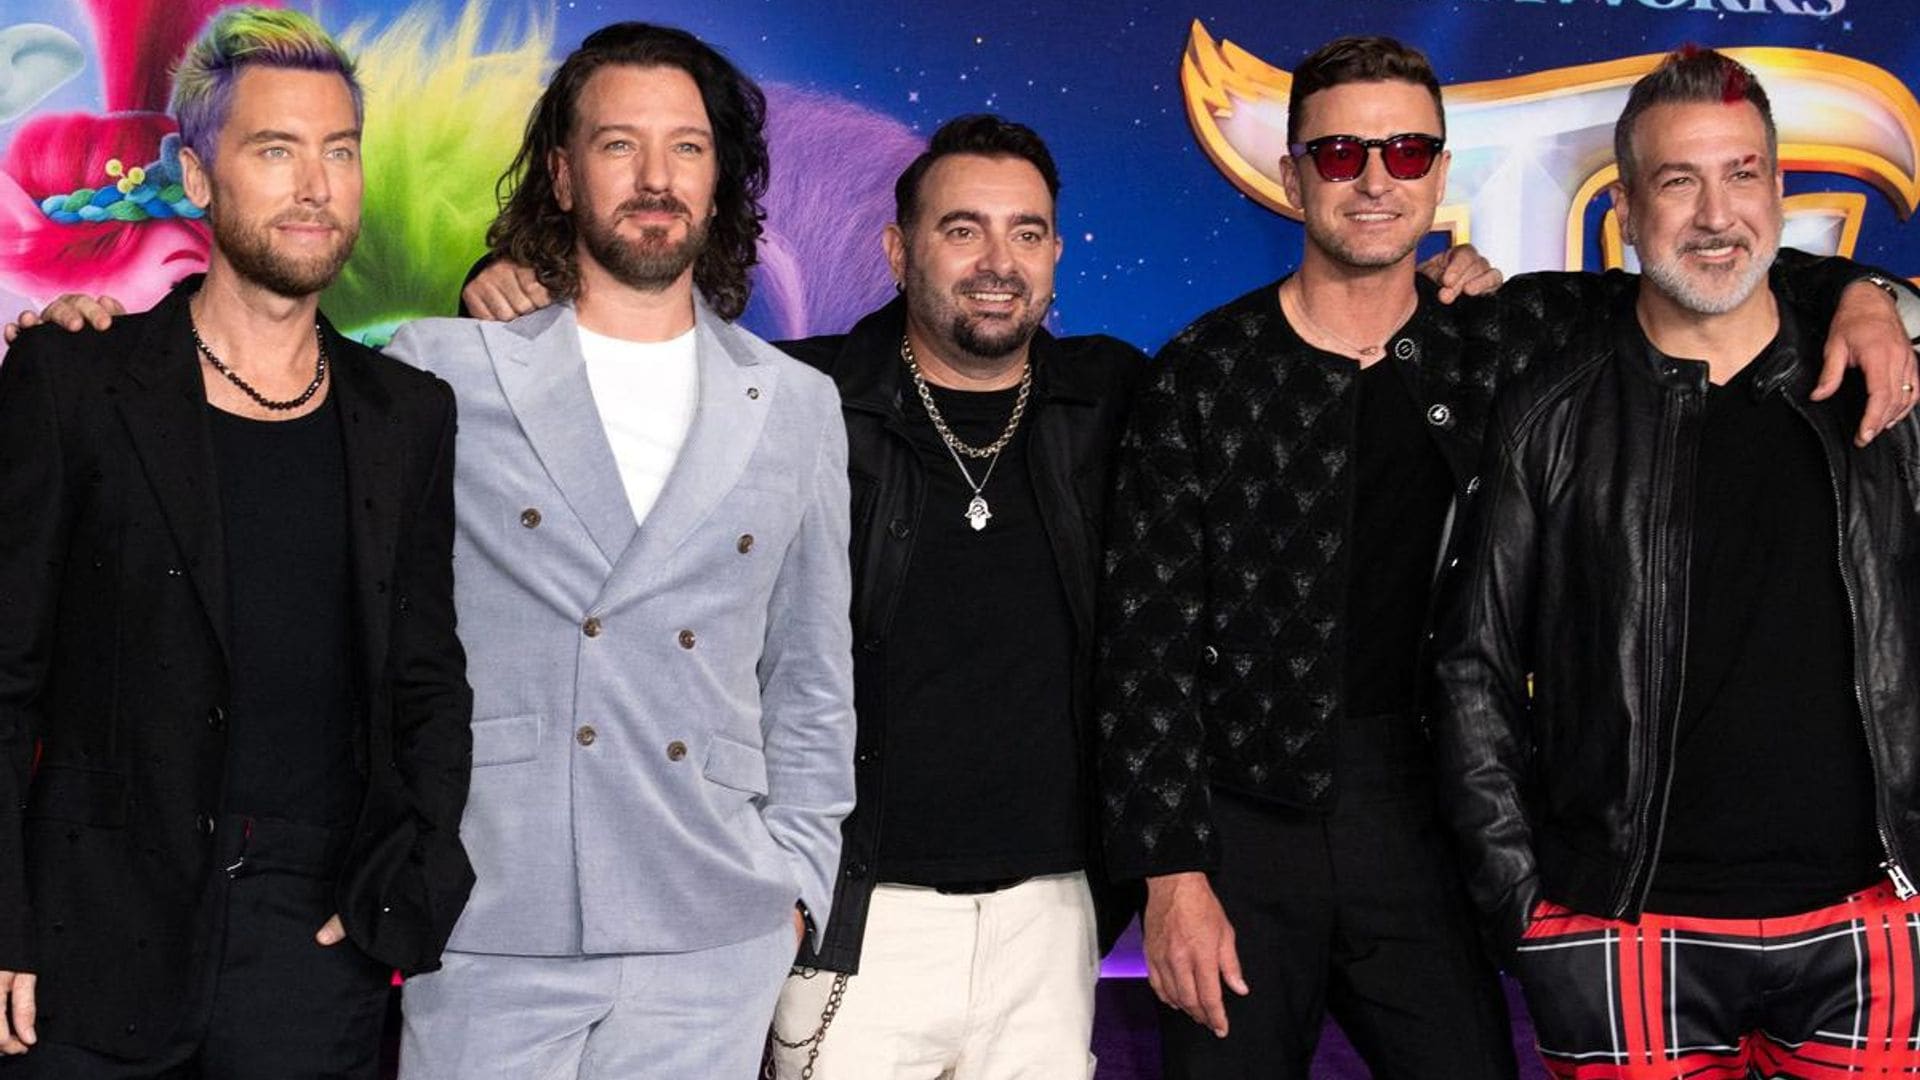 Chrissy Teigen freaks out as NSYNC reunites at Justin Timberlake’s concert